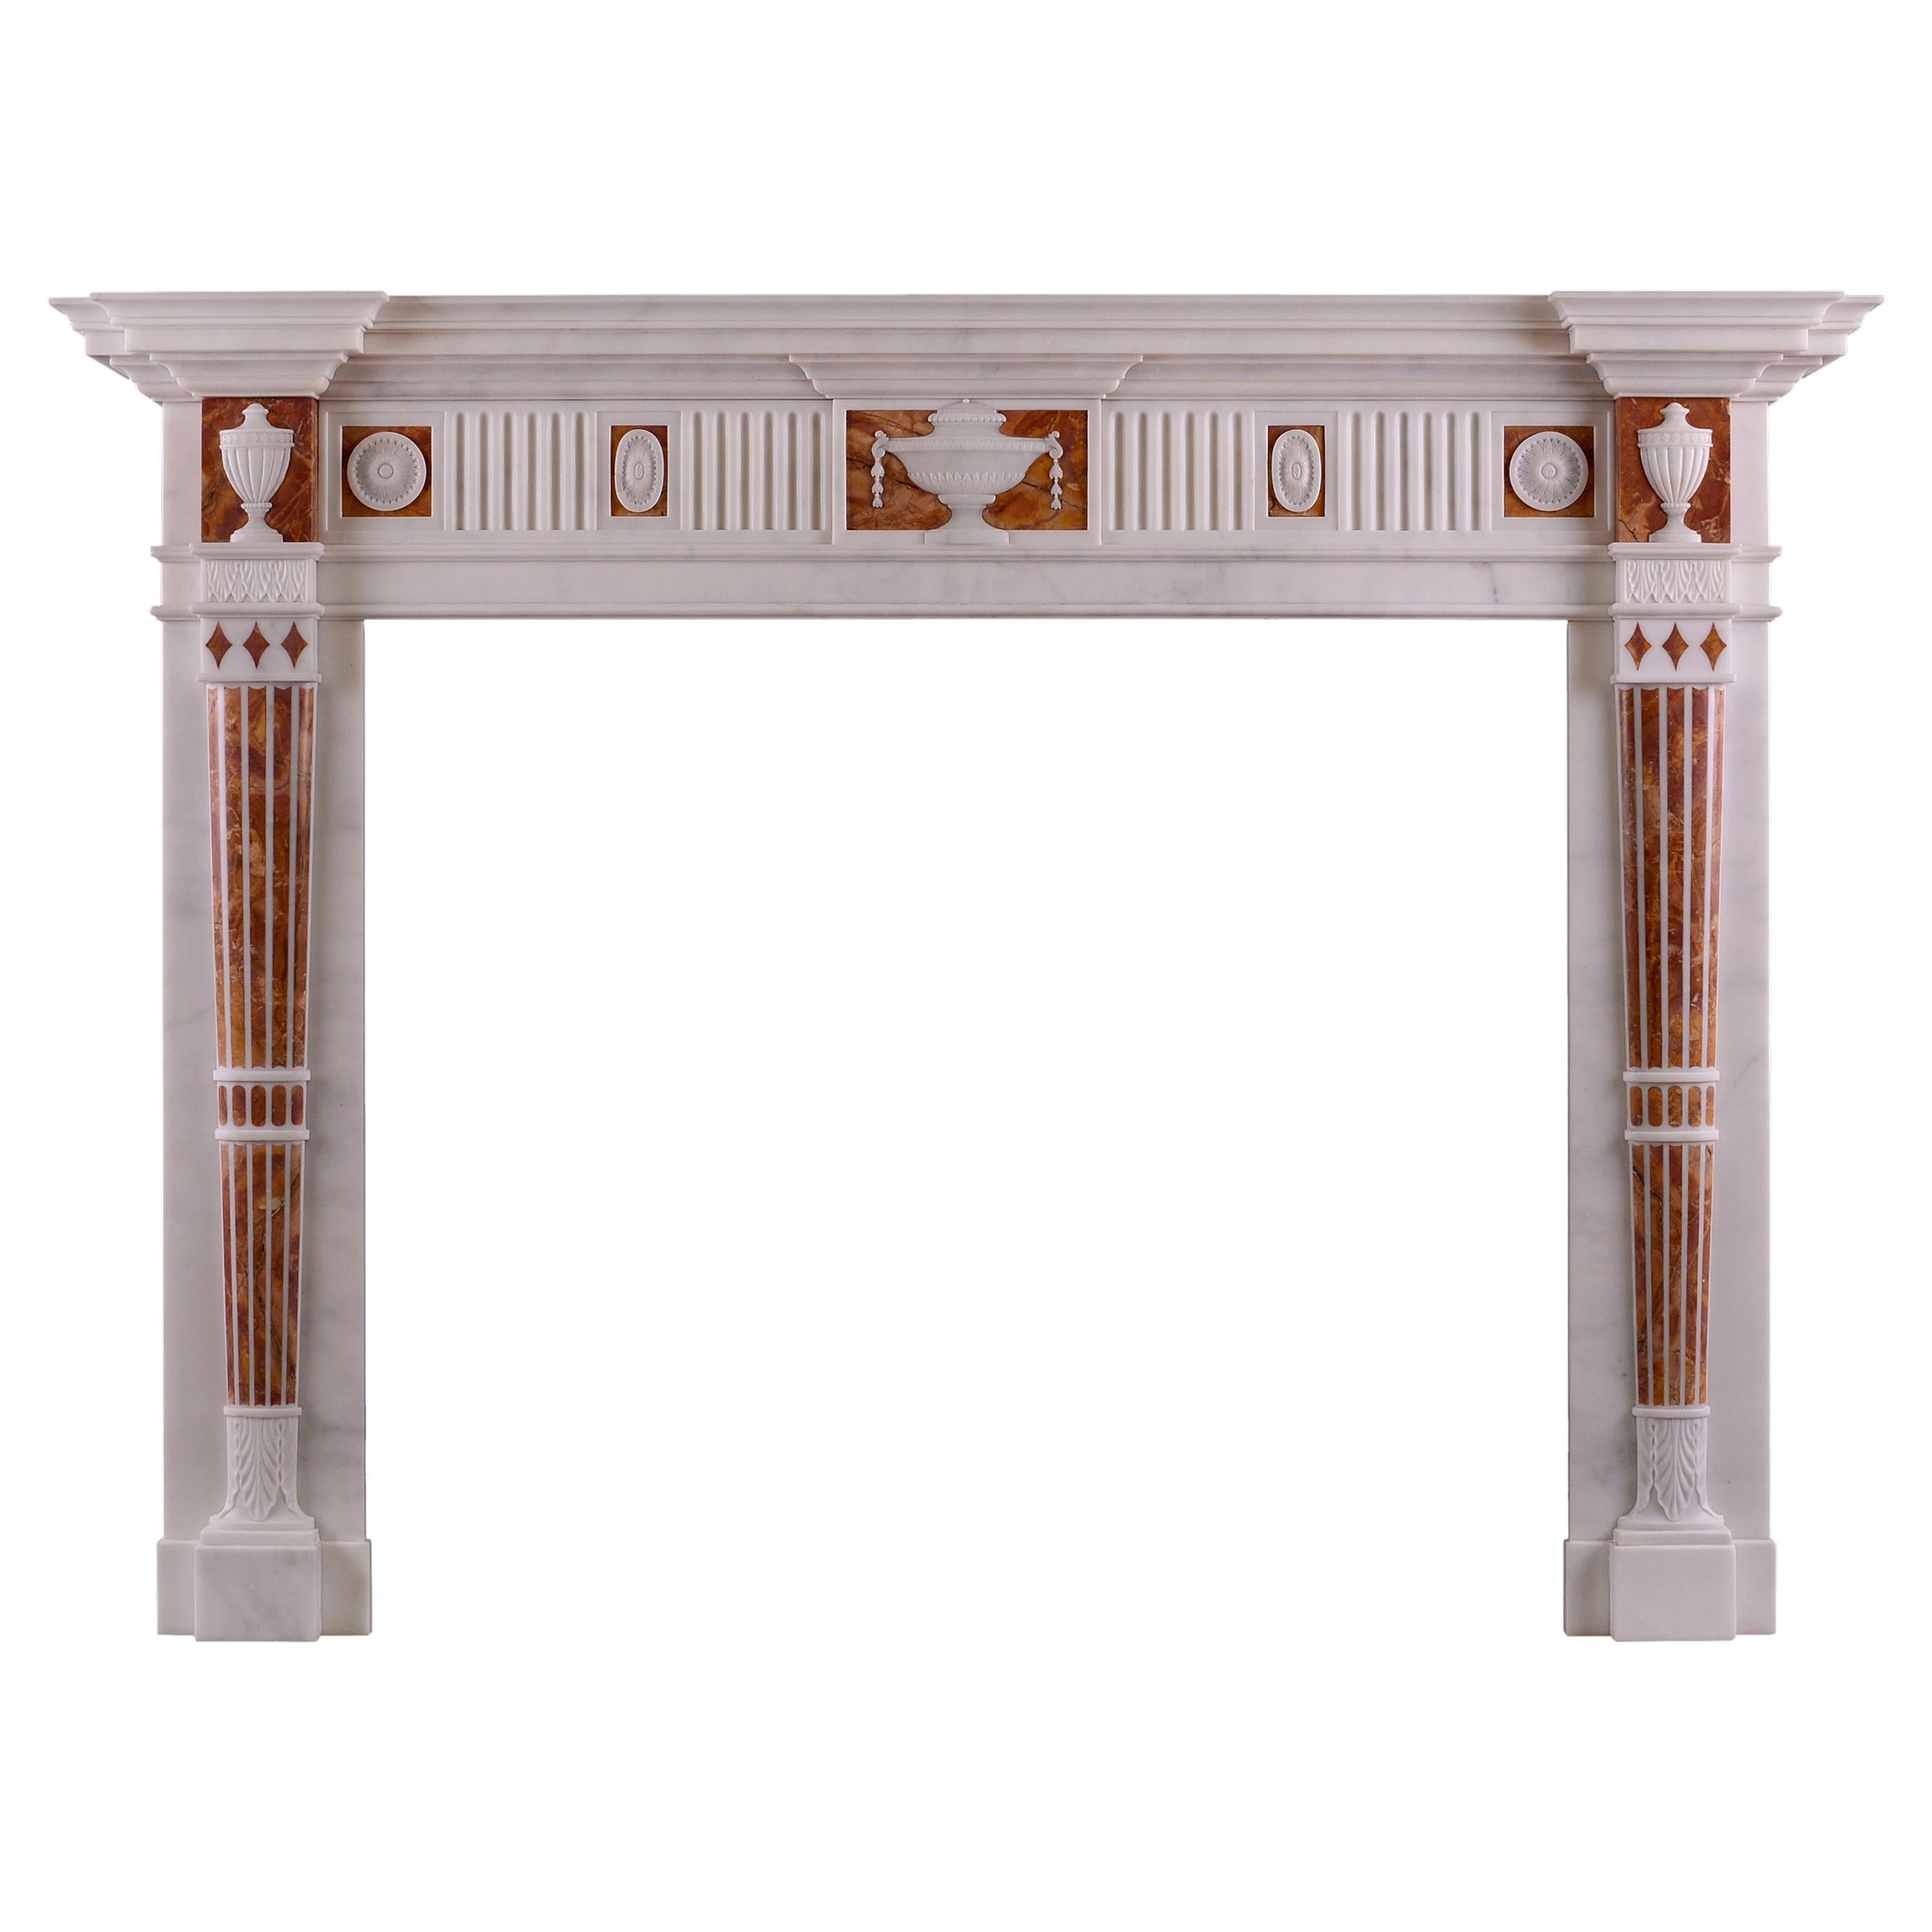 White Statuary Marble Fireplace with Jasper Inlay in the Late Georgian Manner